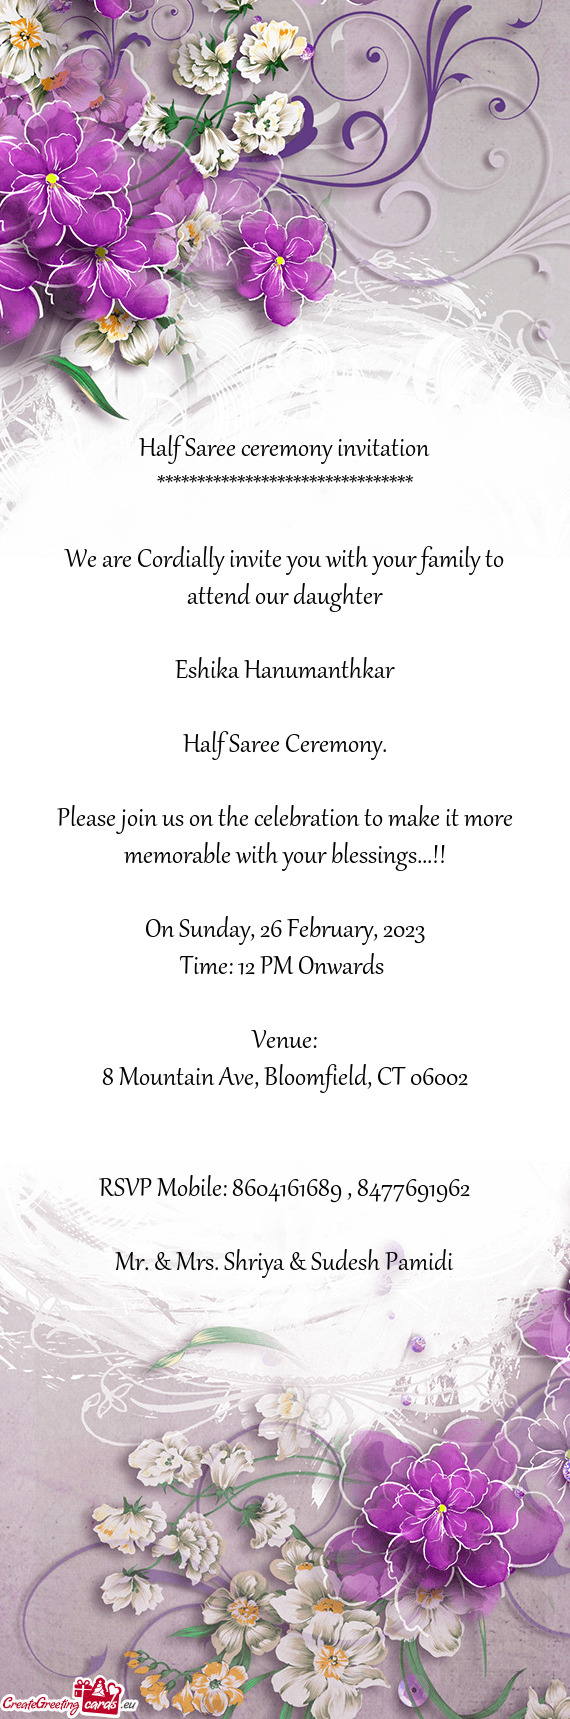 We are Cordially invite you with your family to attend our daughter